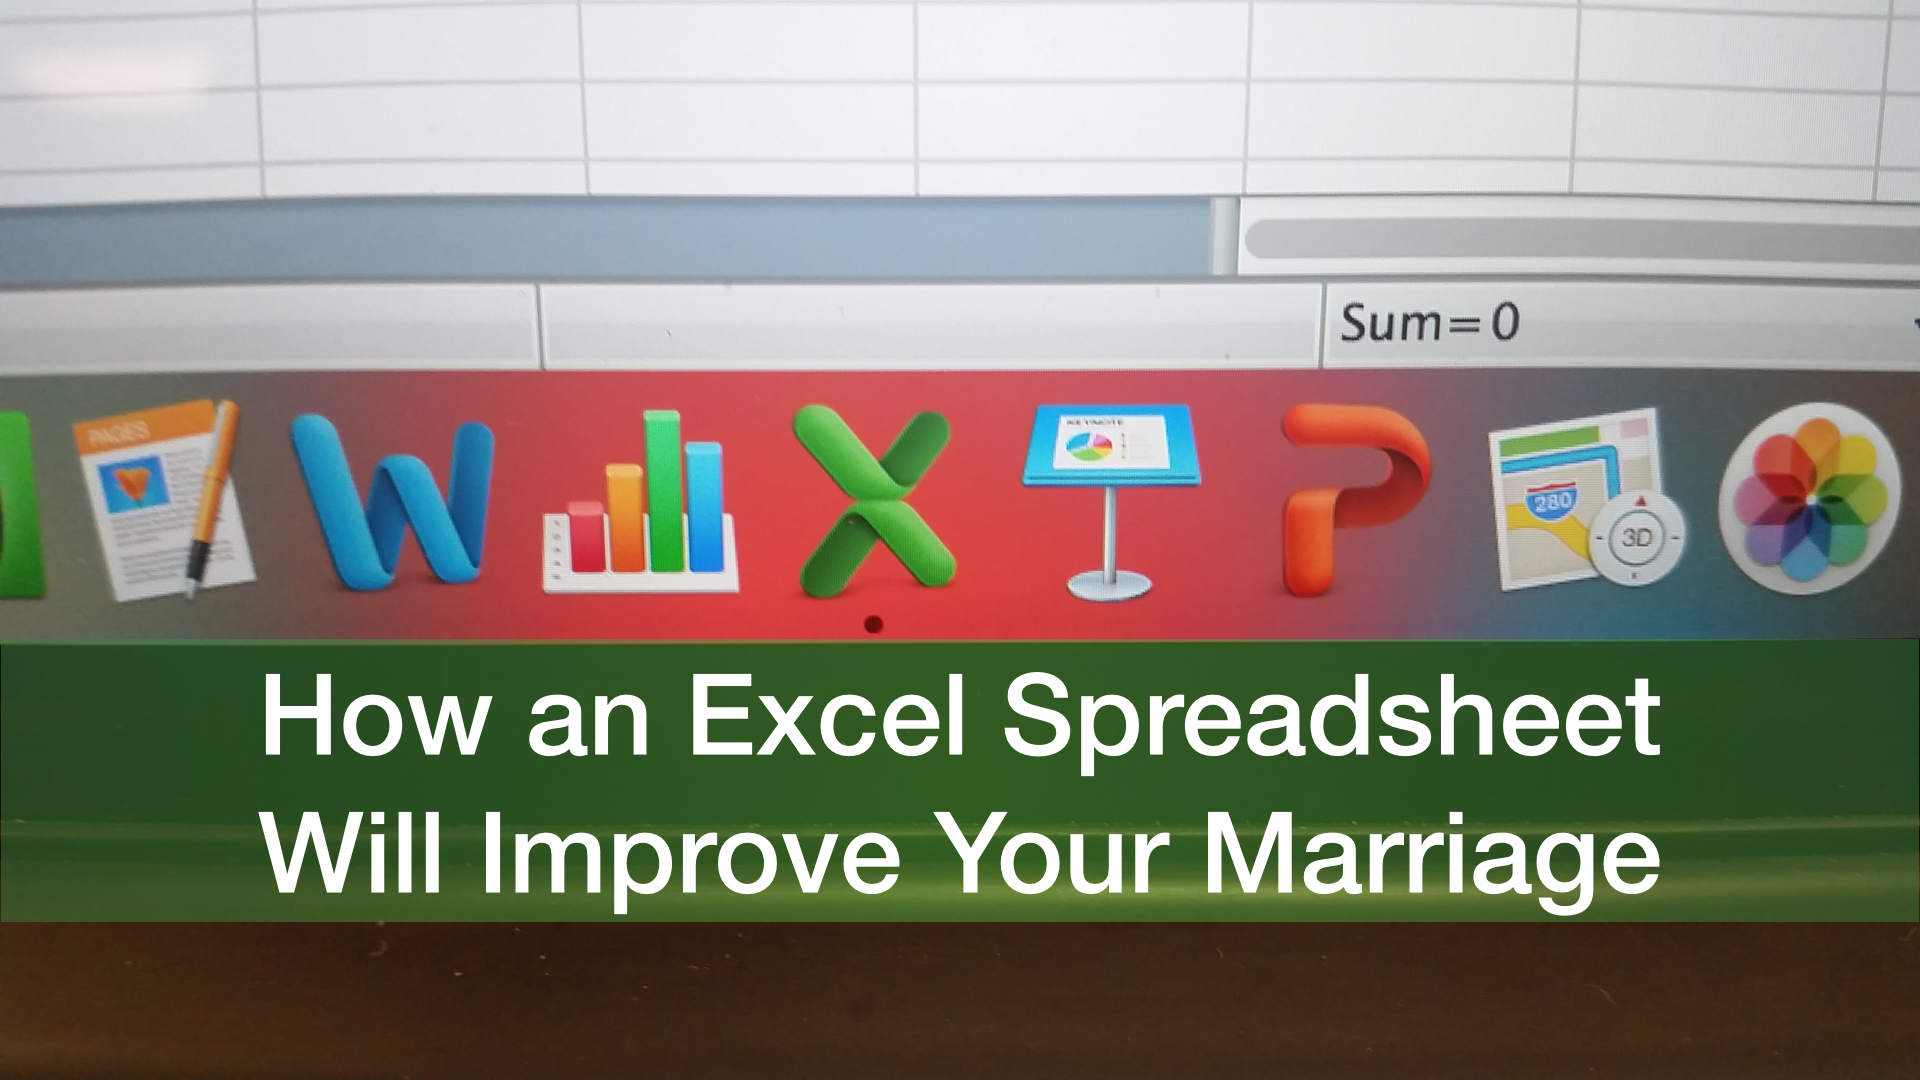 How an Excel Spreadsheet Will Improve Your Marriage